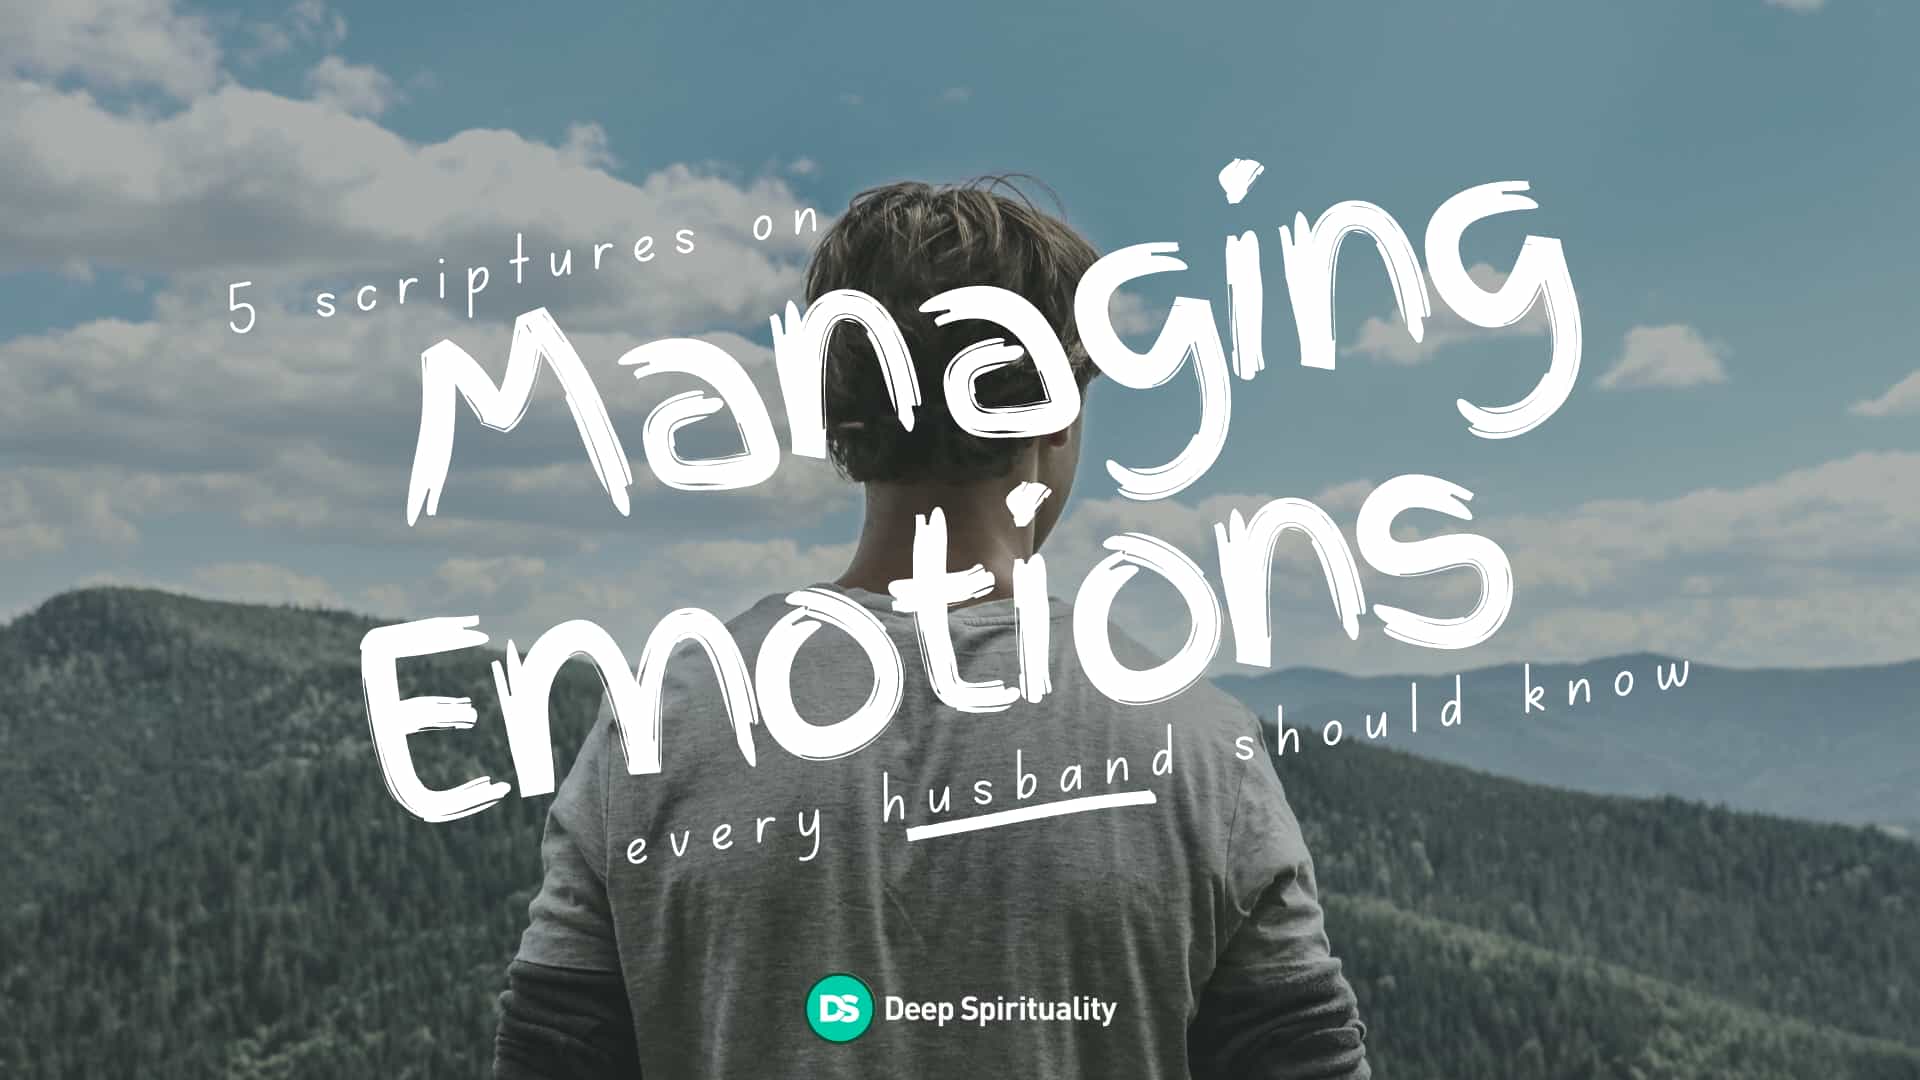 5 Scriptures on Managing Emotions Every Husband Should Know 2